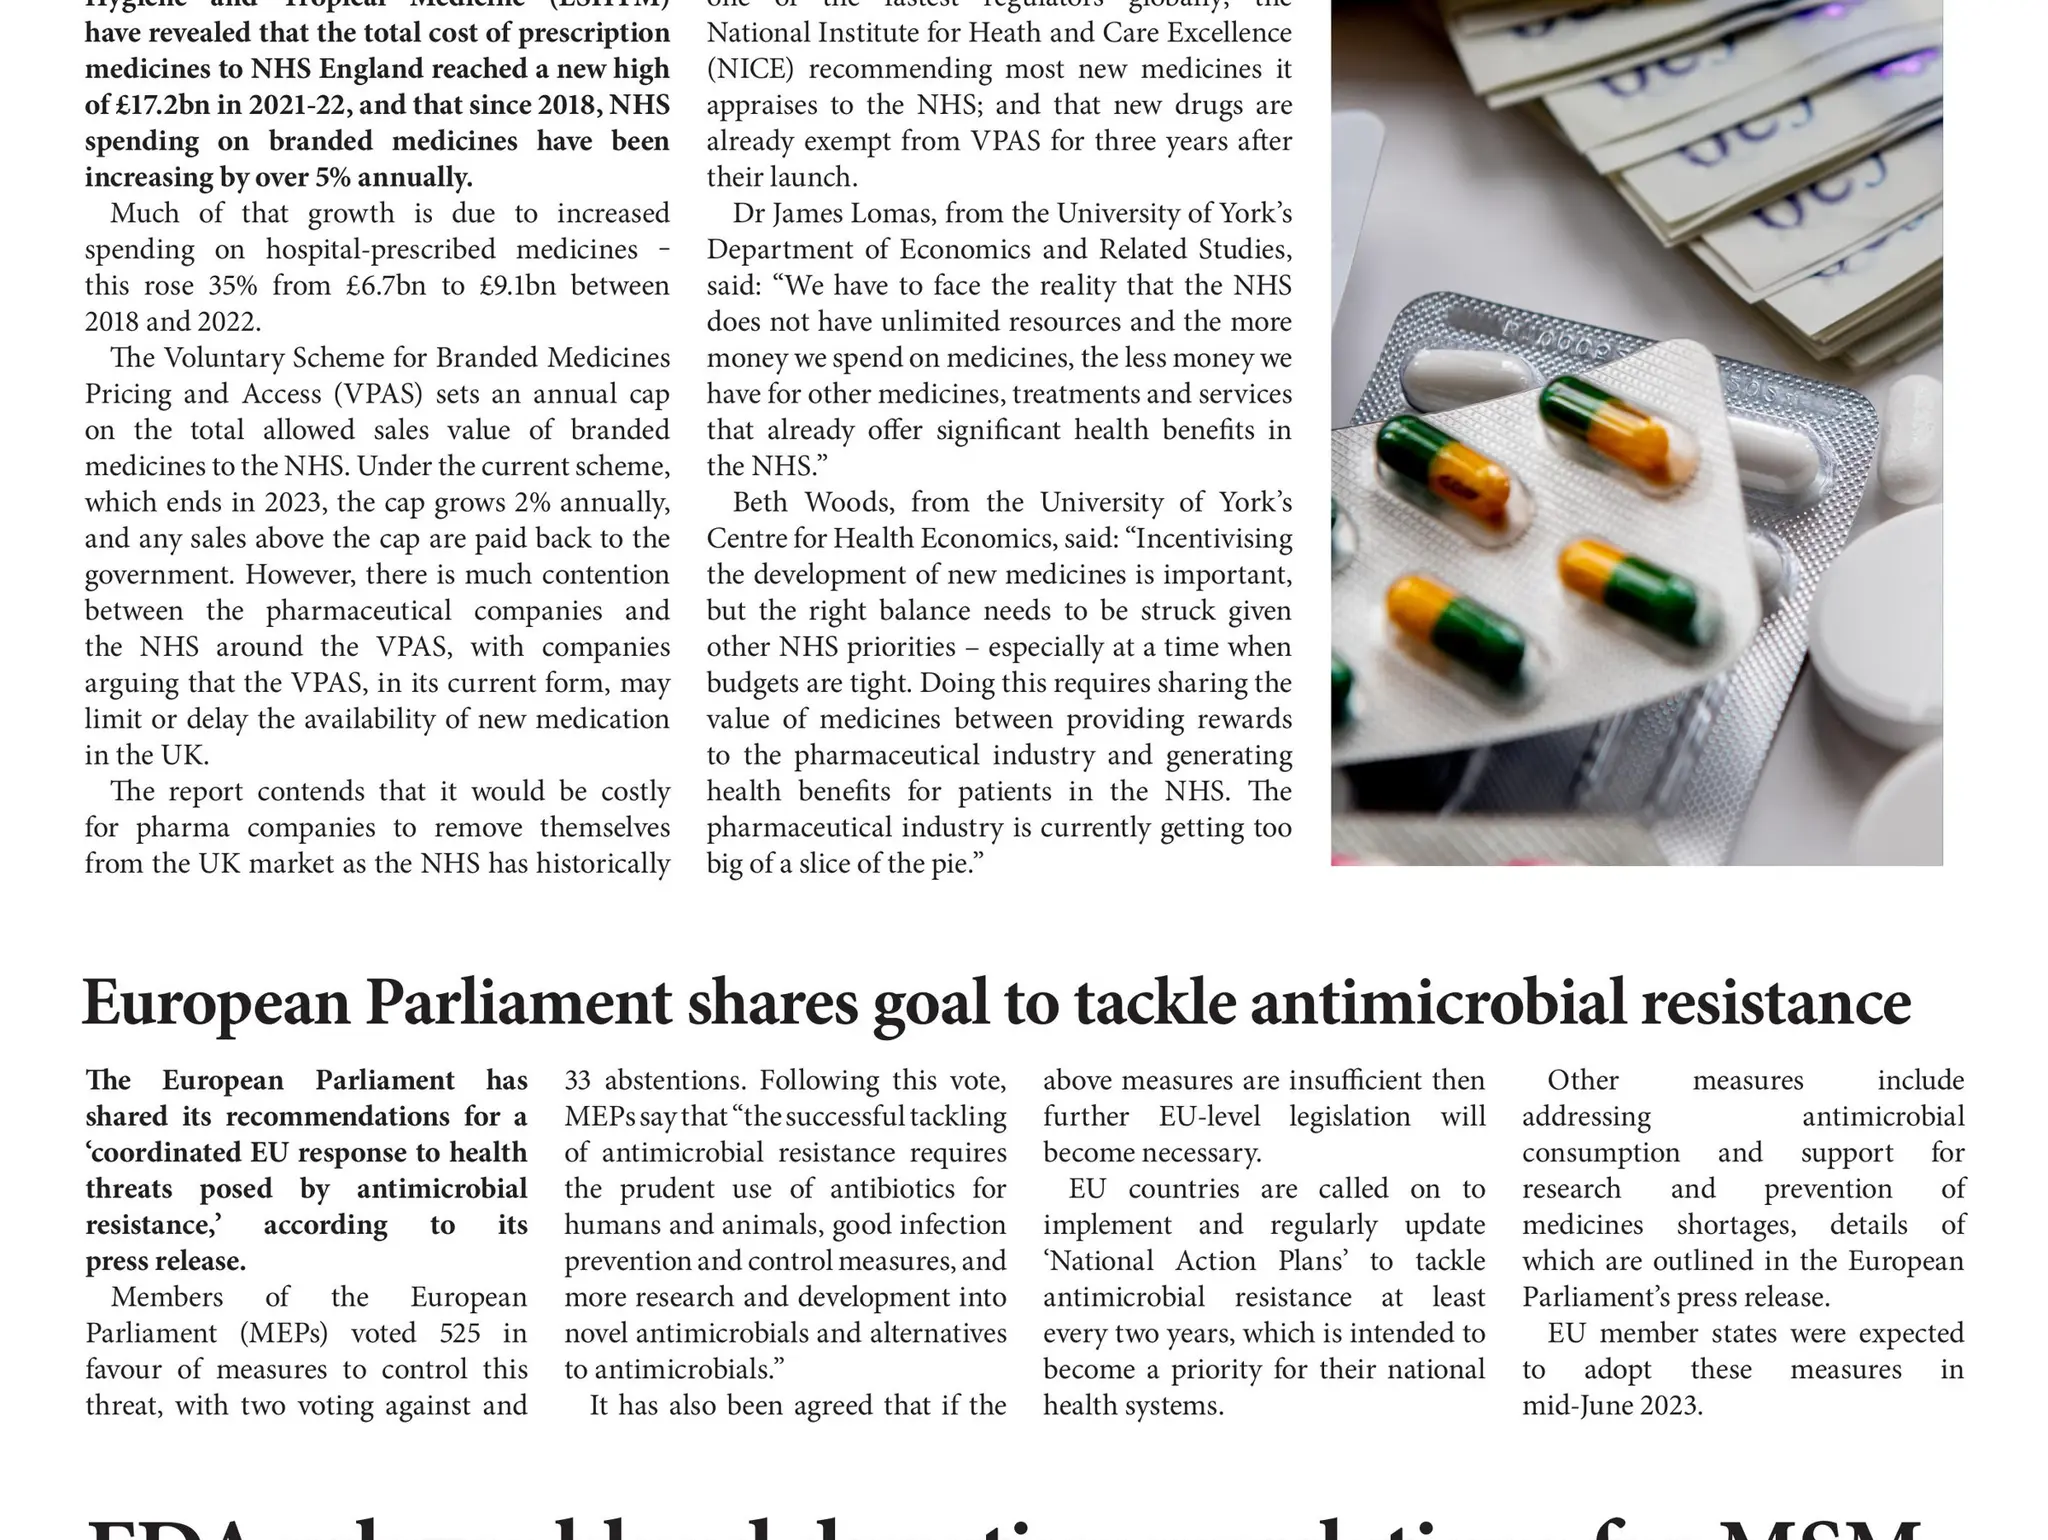 European Parliament shares goal to tackle antimicrobial resistance